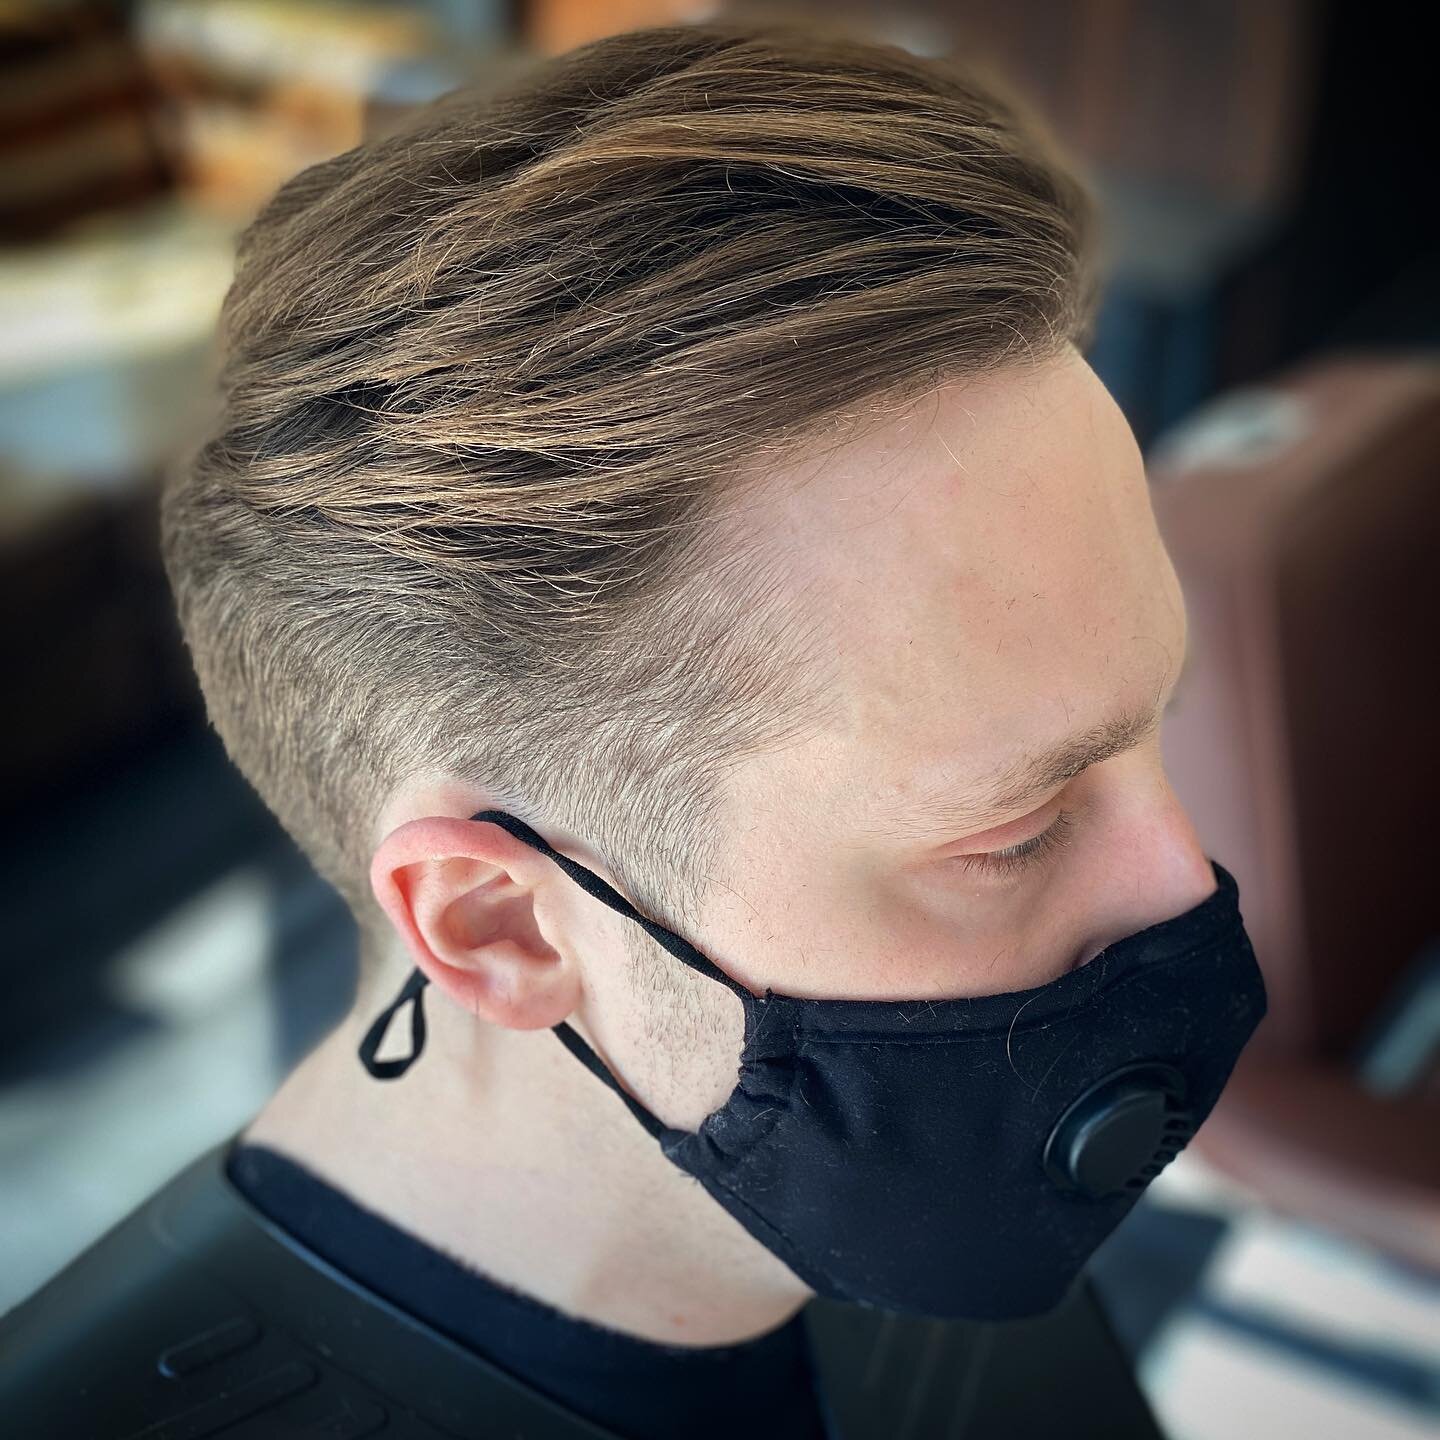 Been busy tidying up surbiton heads..
This one was styled with Layrite cement to give texture and a strong hold which will last all day.

#TheFellowshipBarberShop #MapleRoad #Surbiton #Surrey #Kingston #KingstonUponThames #Richmond #Berrylands #Esher